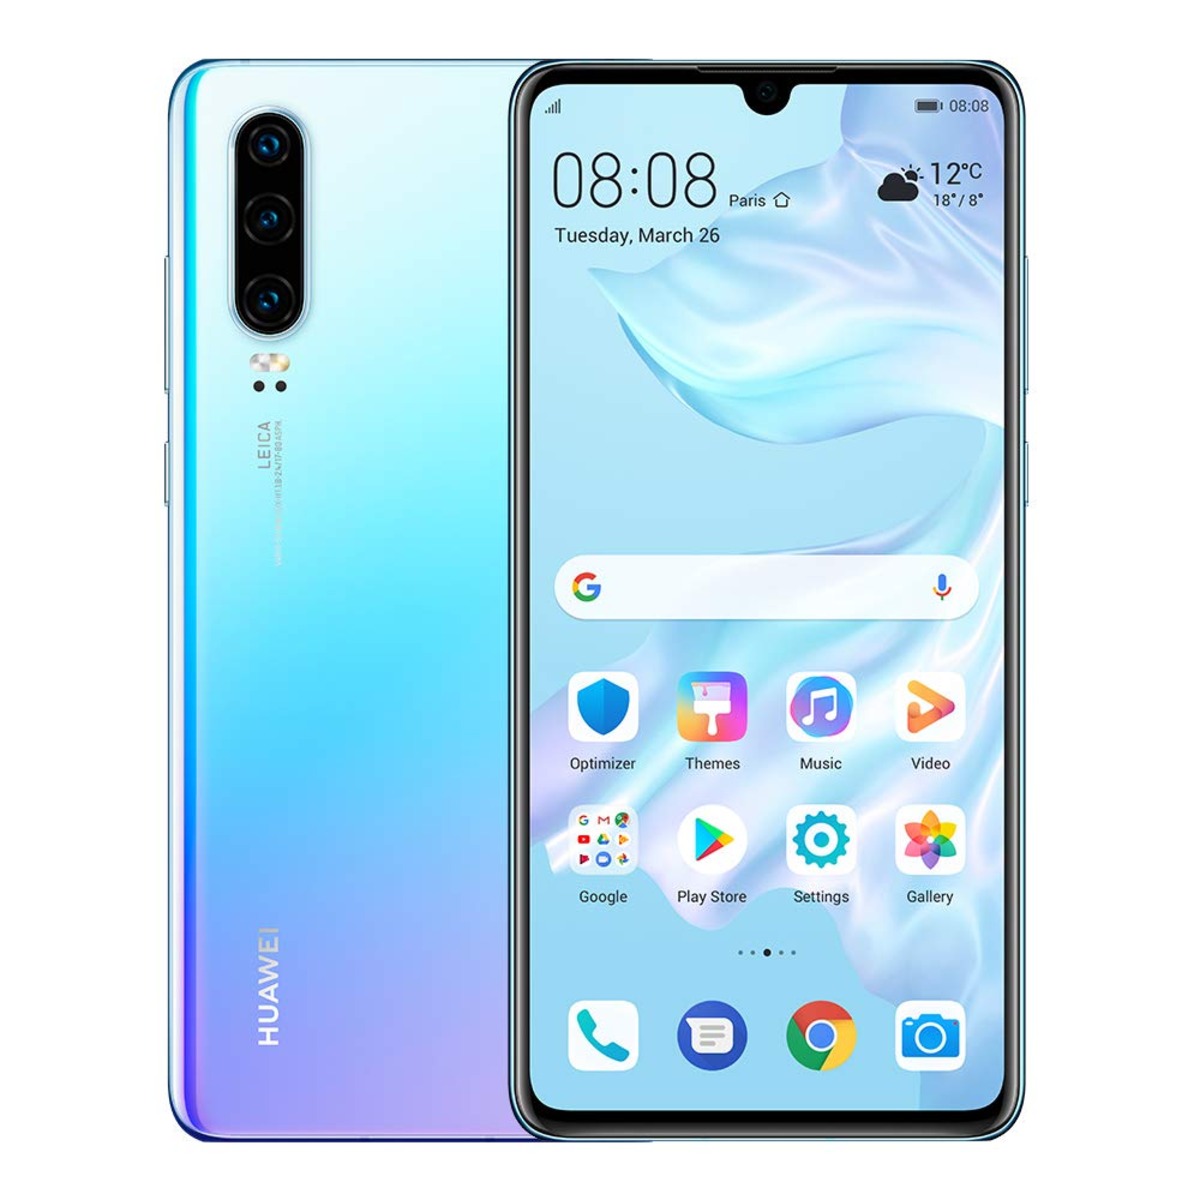 huawei-p30-pro-awarded-best-smartphone-2023-at-mwc-shanghai